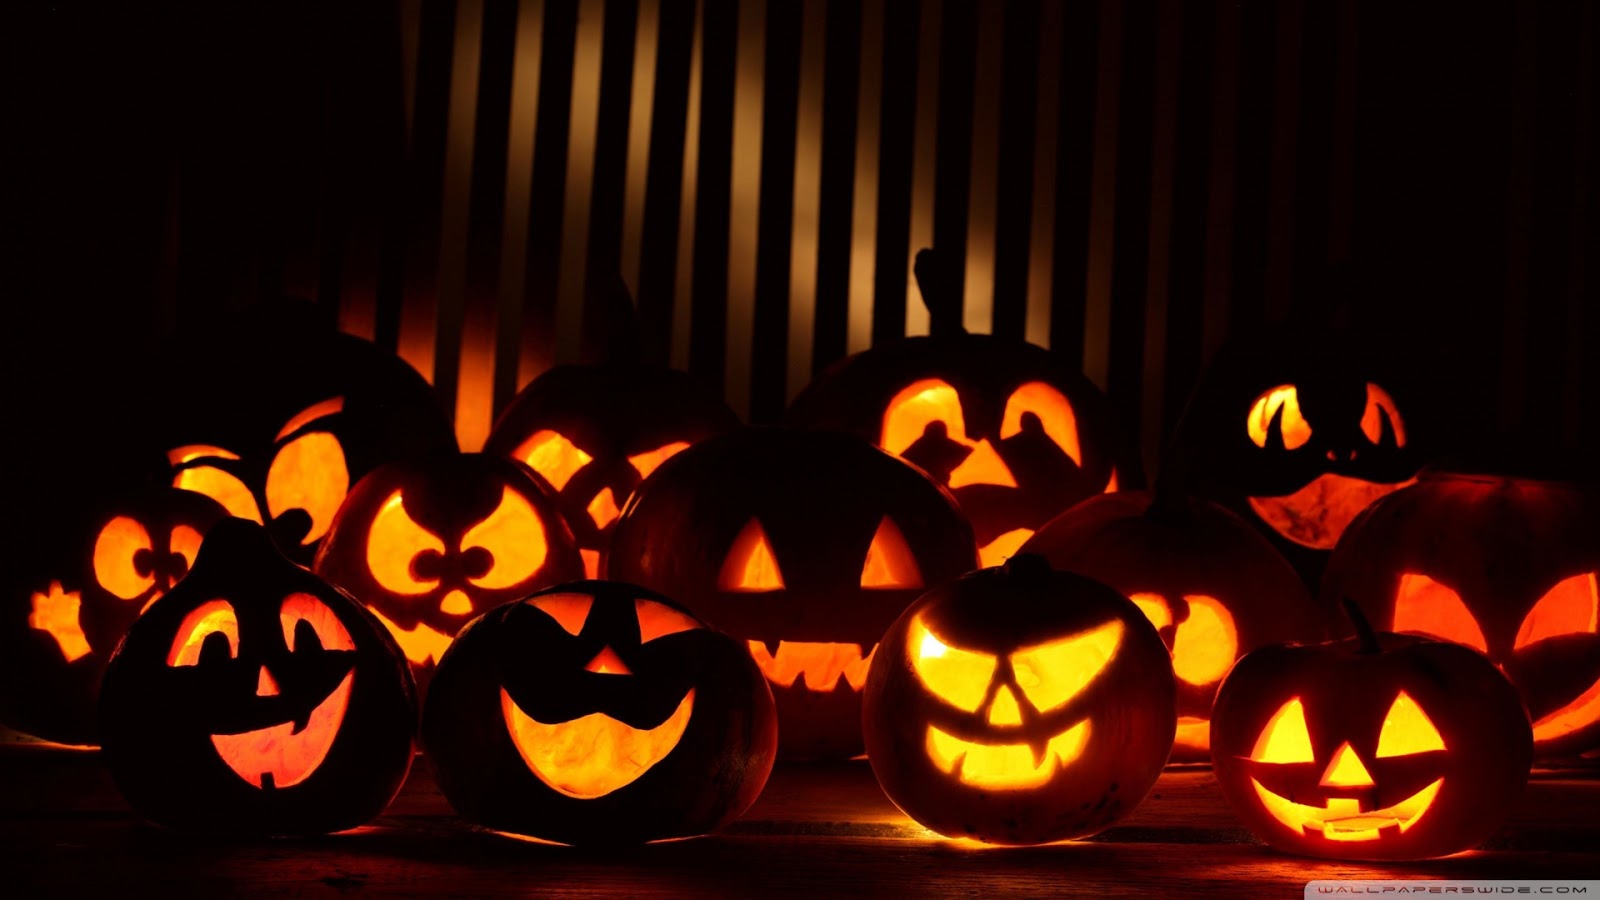 50 Happy Halloween Scary Wallpaper Background Images DP And